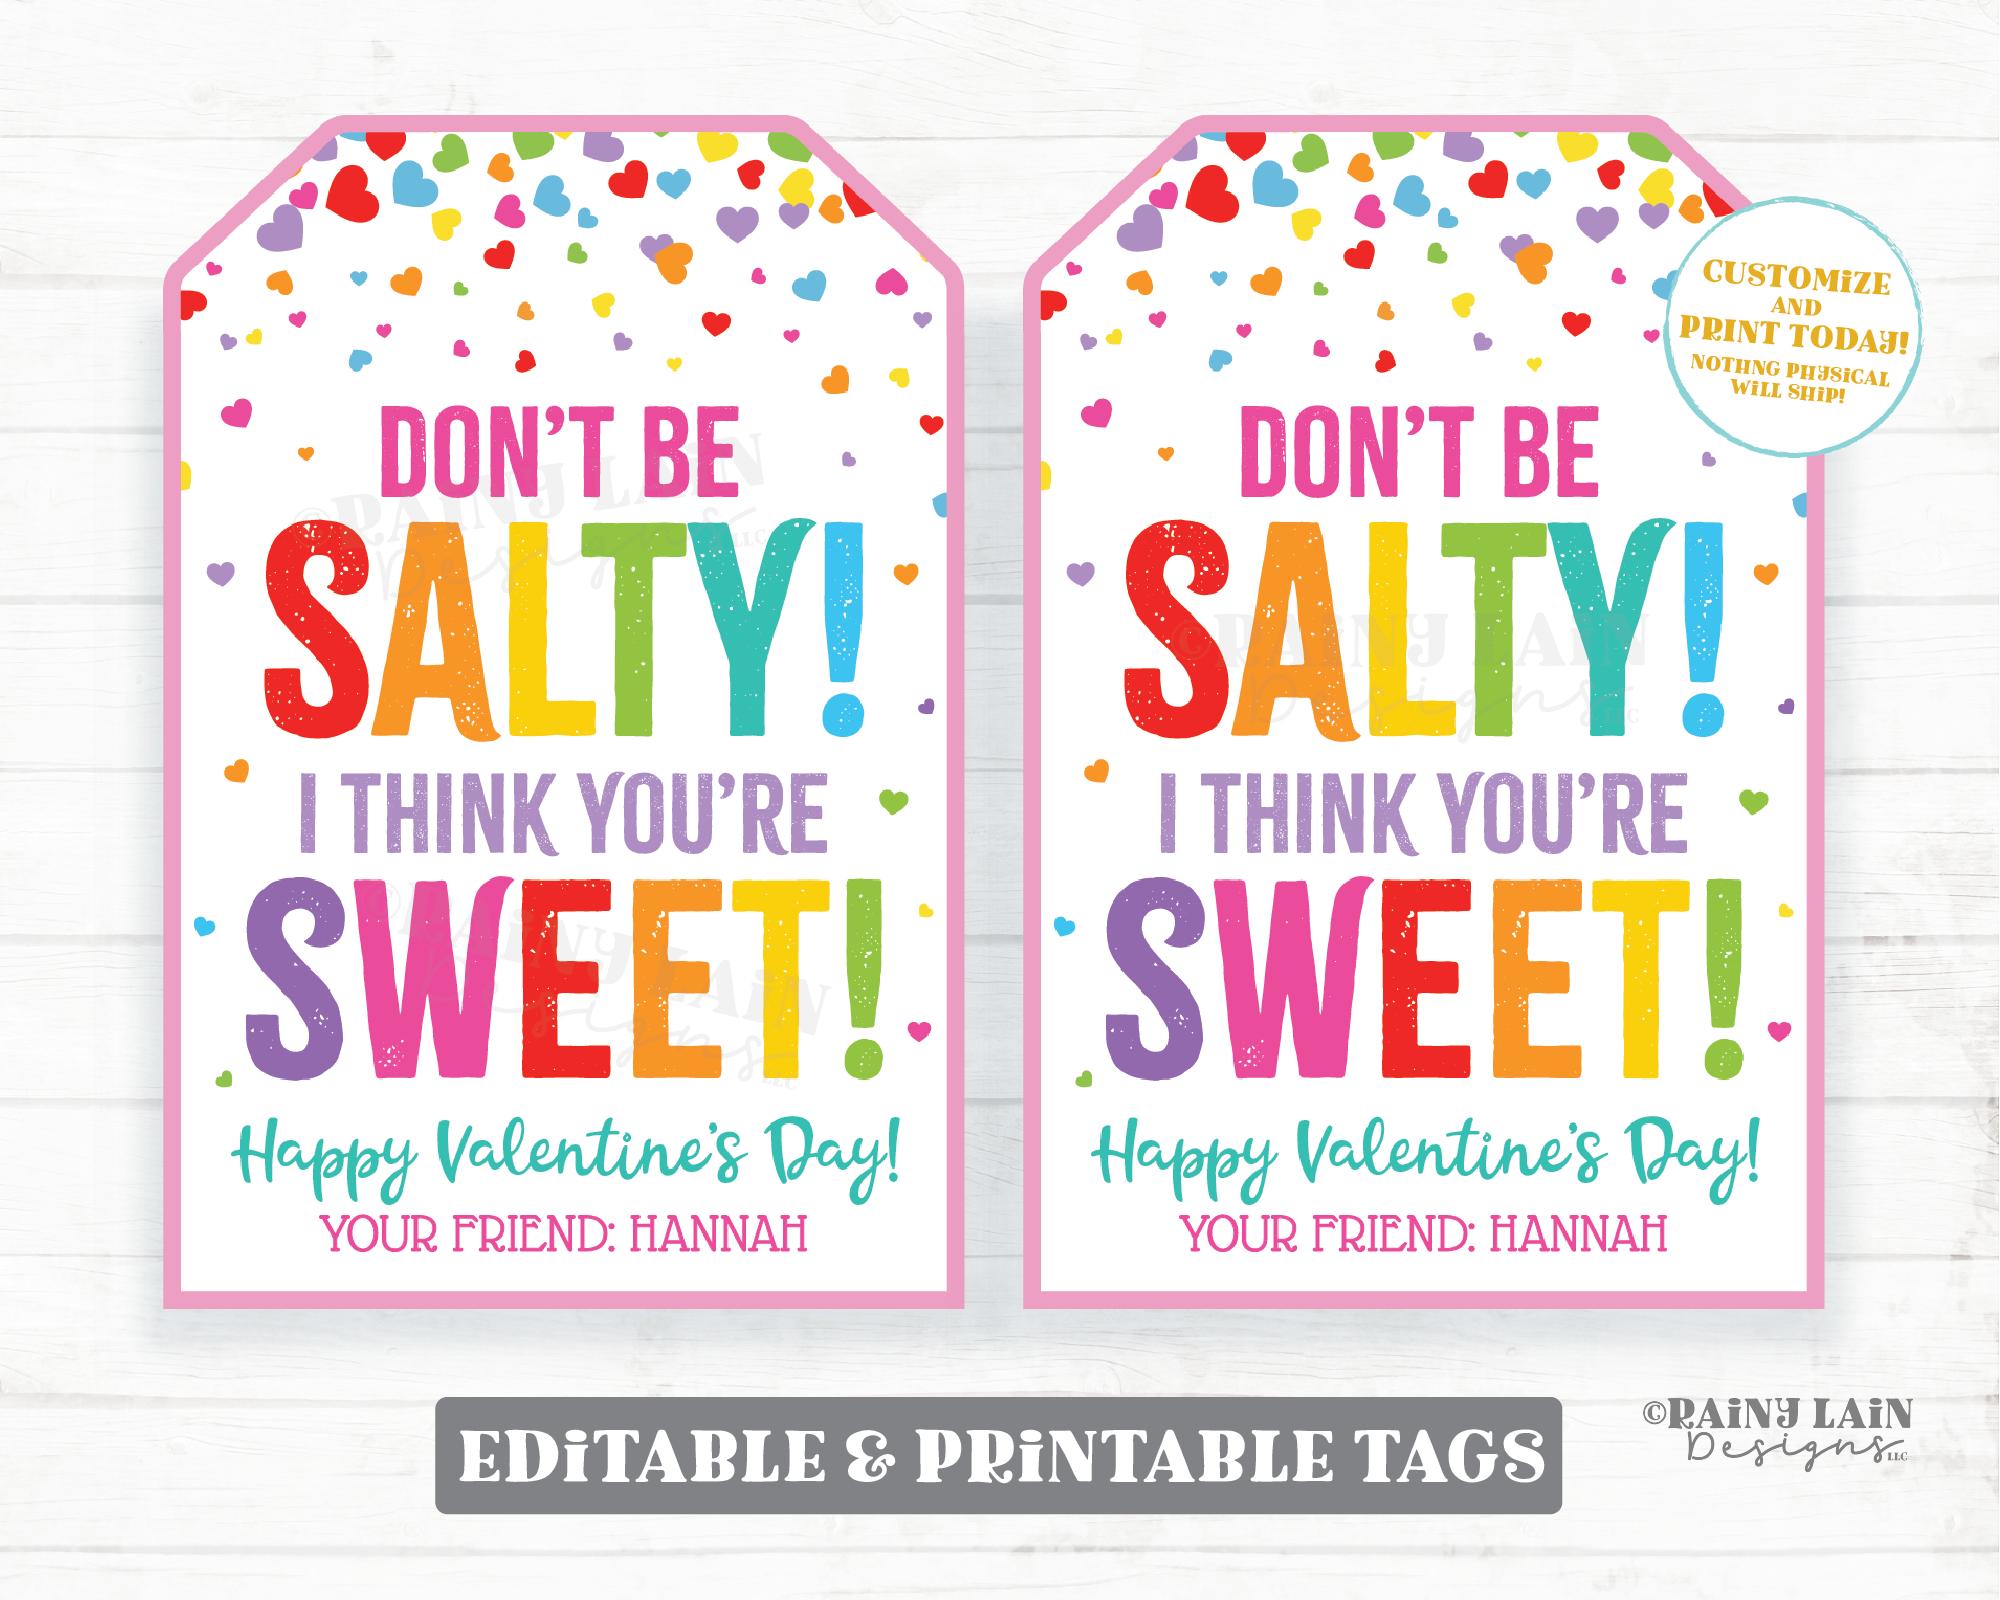 Don't be Salty I think you're Sweet Valentine Tag Chips Pretzels Crackers Snack Mix Sweet n Salty Gift Preschool Classroom Printable